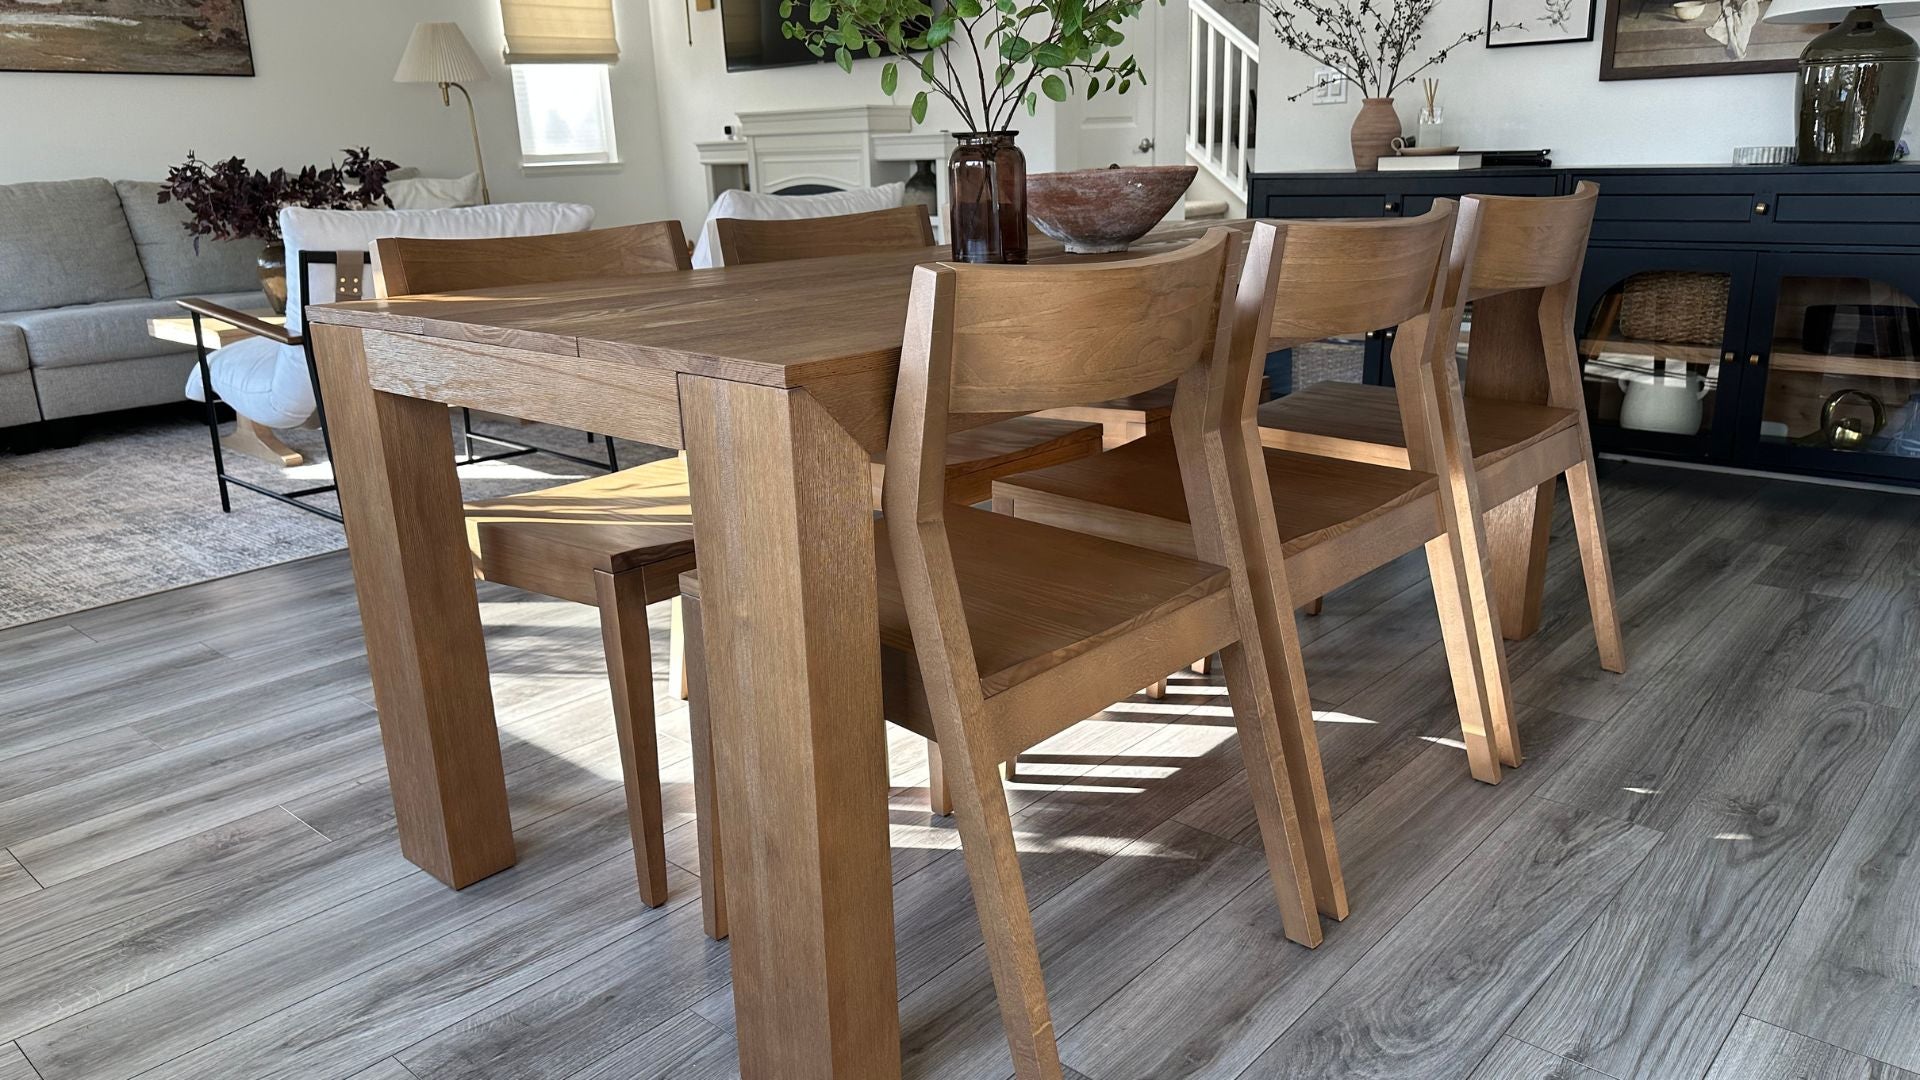 Solid wood modern dining table in pecan with 6 solid wood dining chairs in pecan